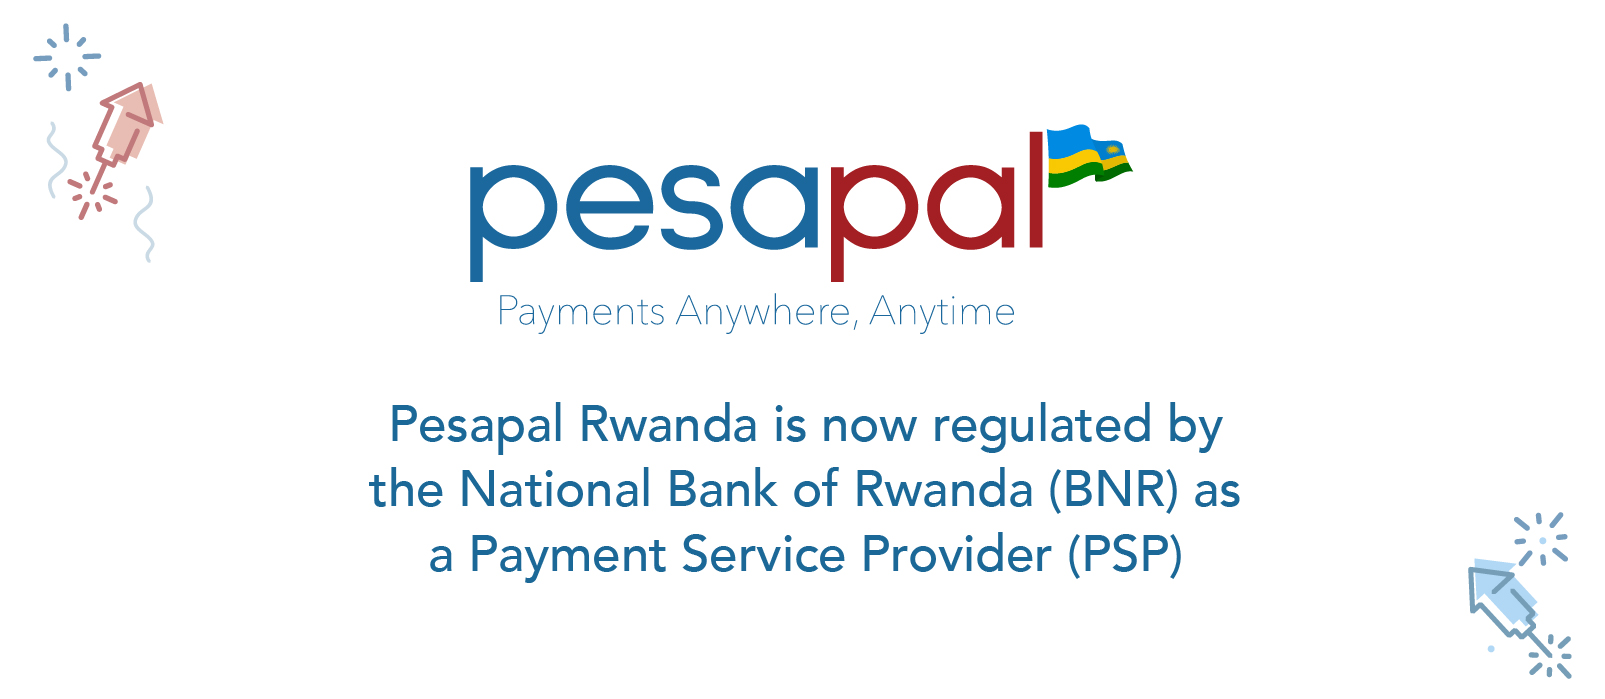 The National Bank of Rwanda licenses Pesapal as a Payment Service Provider (PSP)